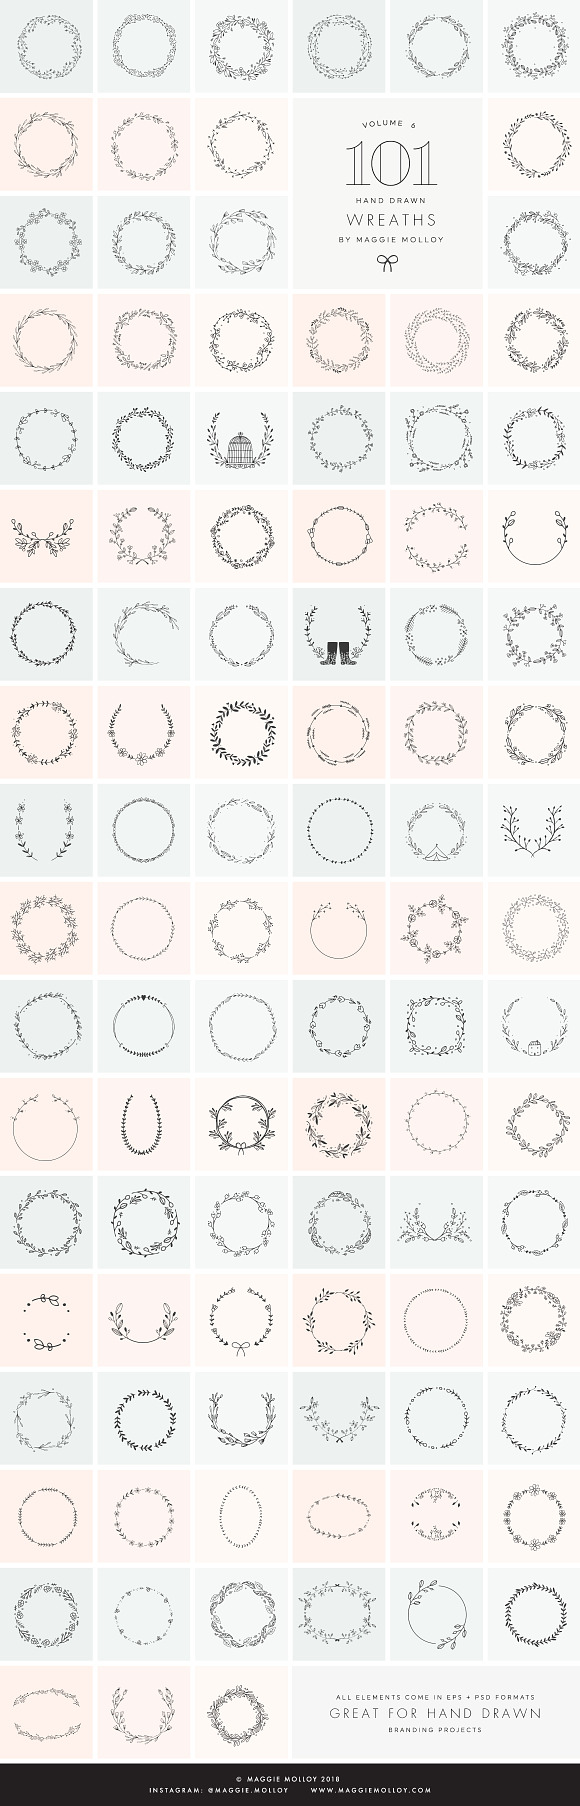 404 Hand Drawn Logo Elements Vol 5-8 in Illustrations - product preview 3